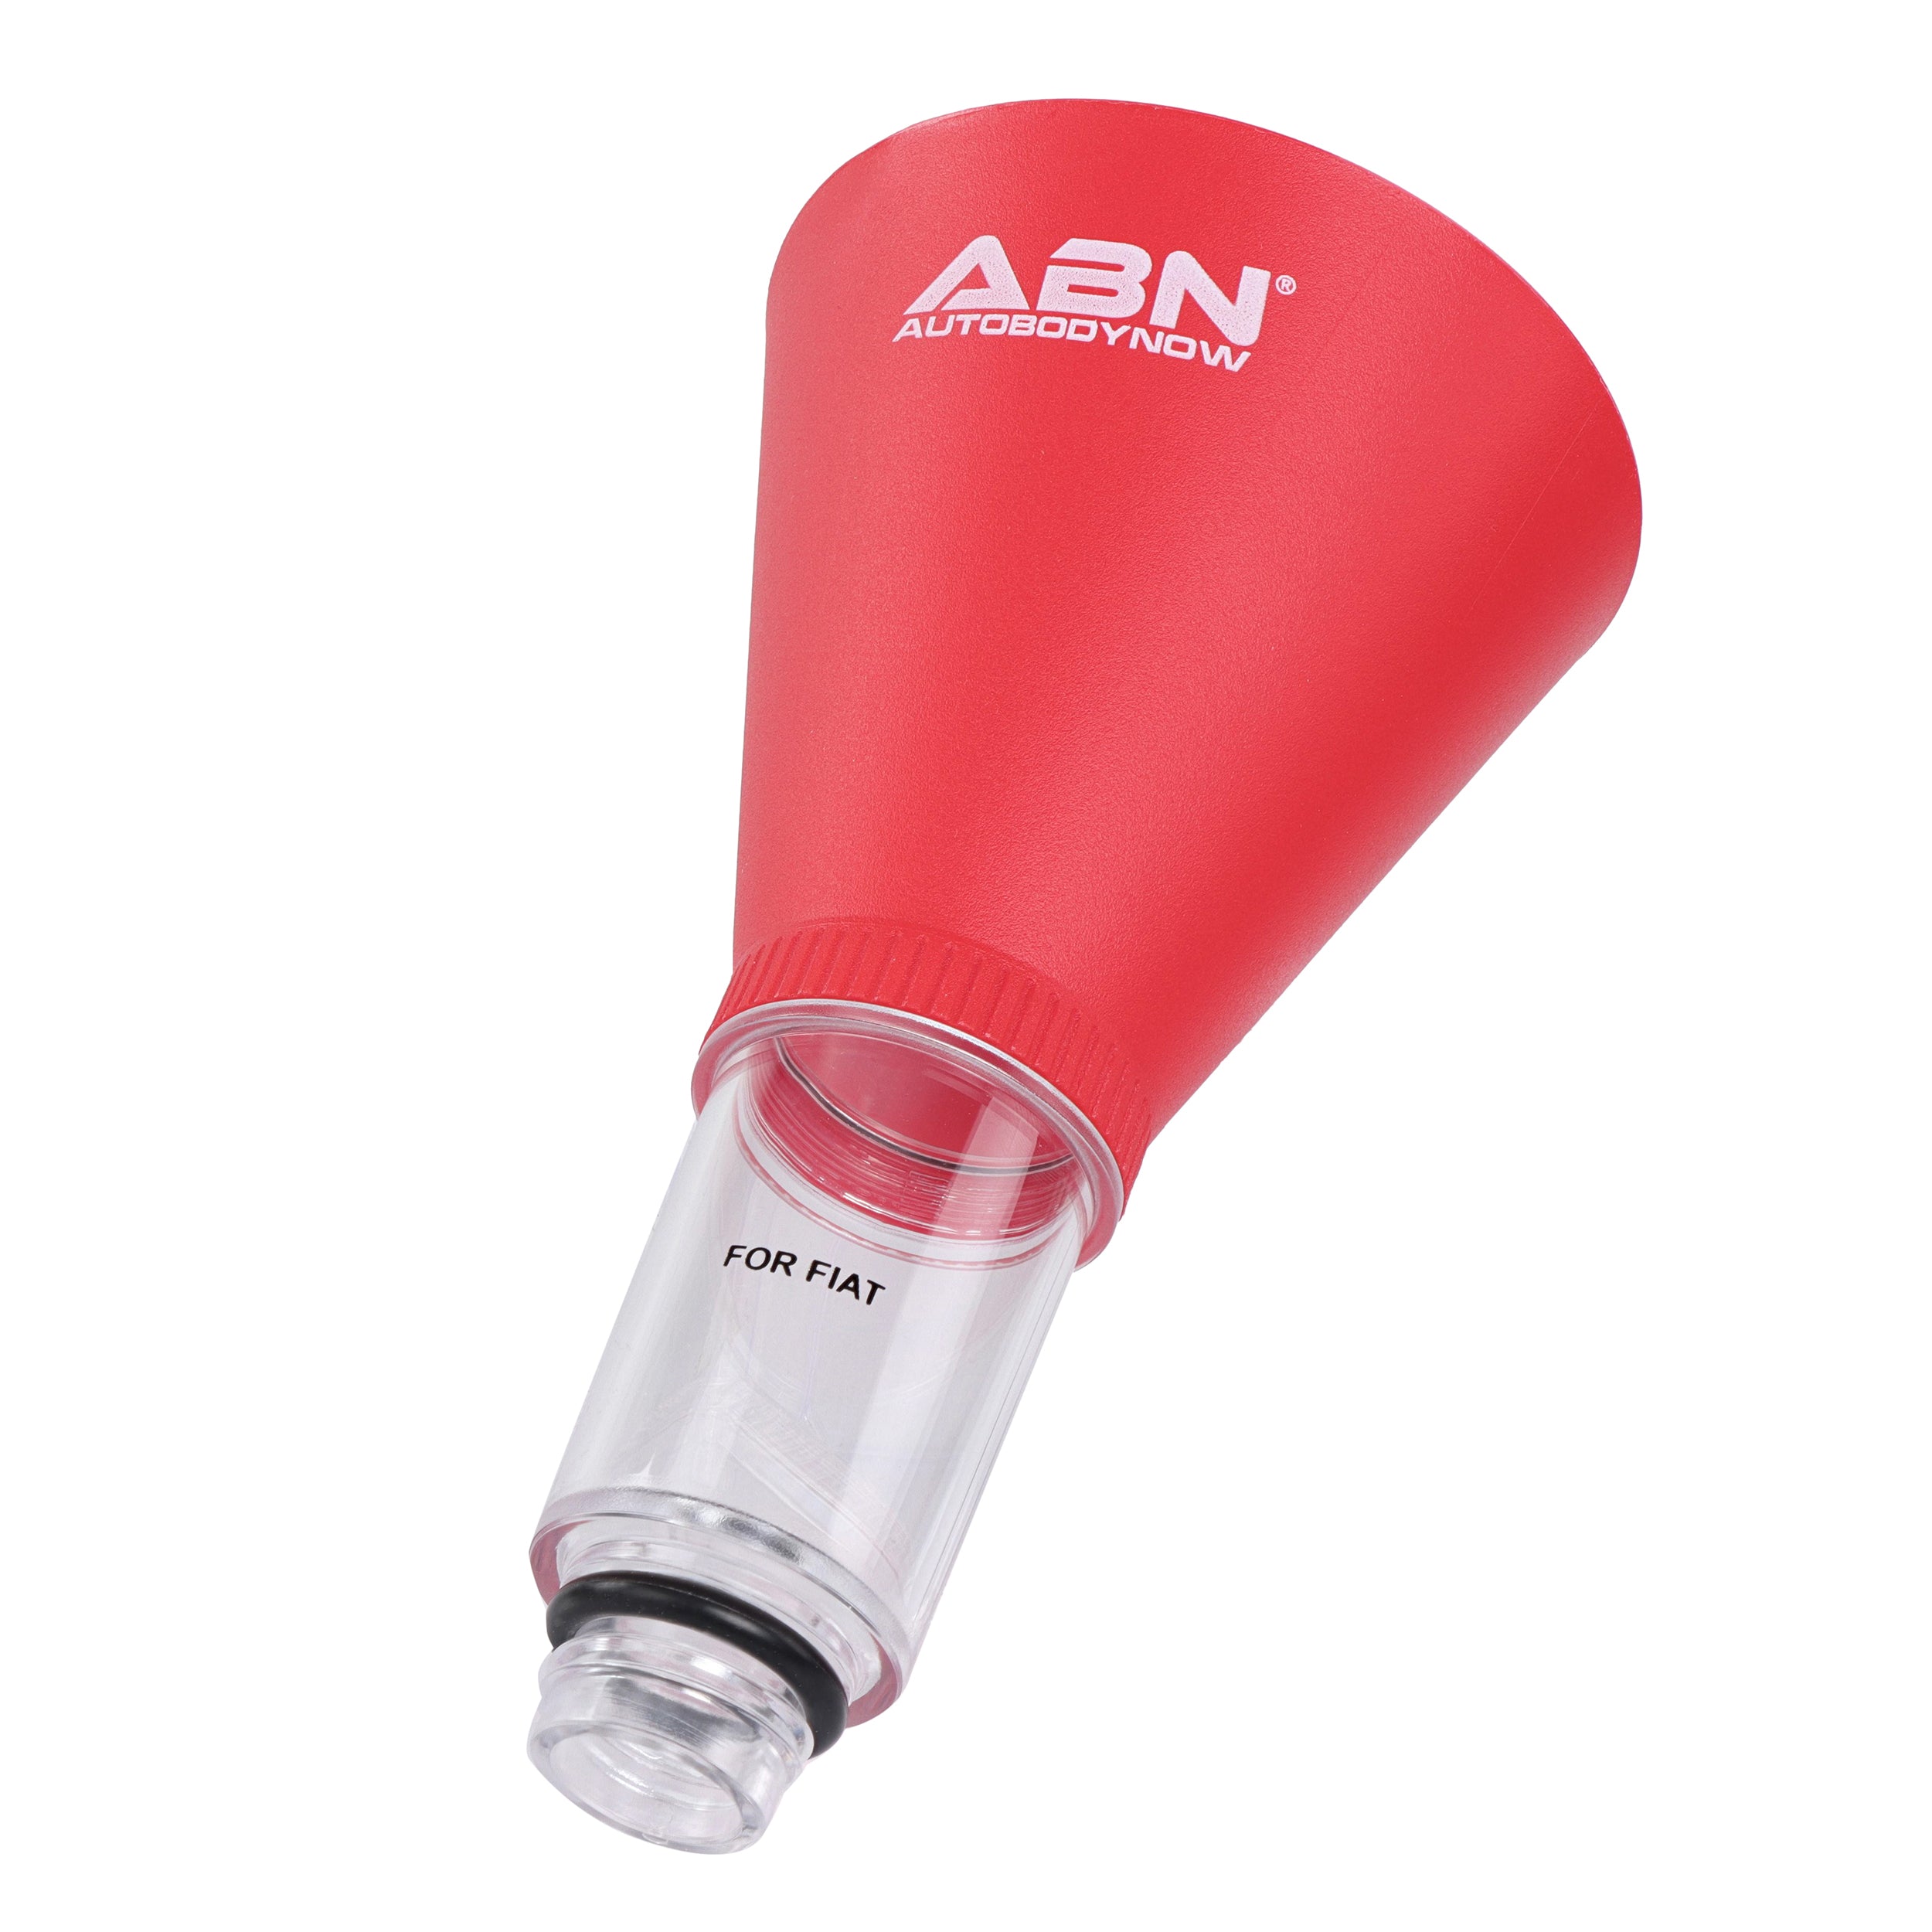 Automotive Funnel - Engine Oil Funnel Compatible with Fiat Engines